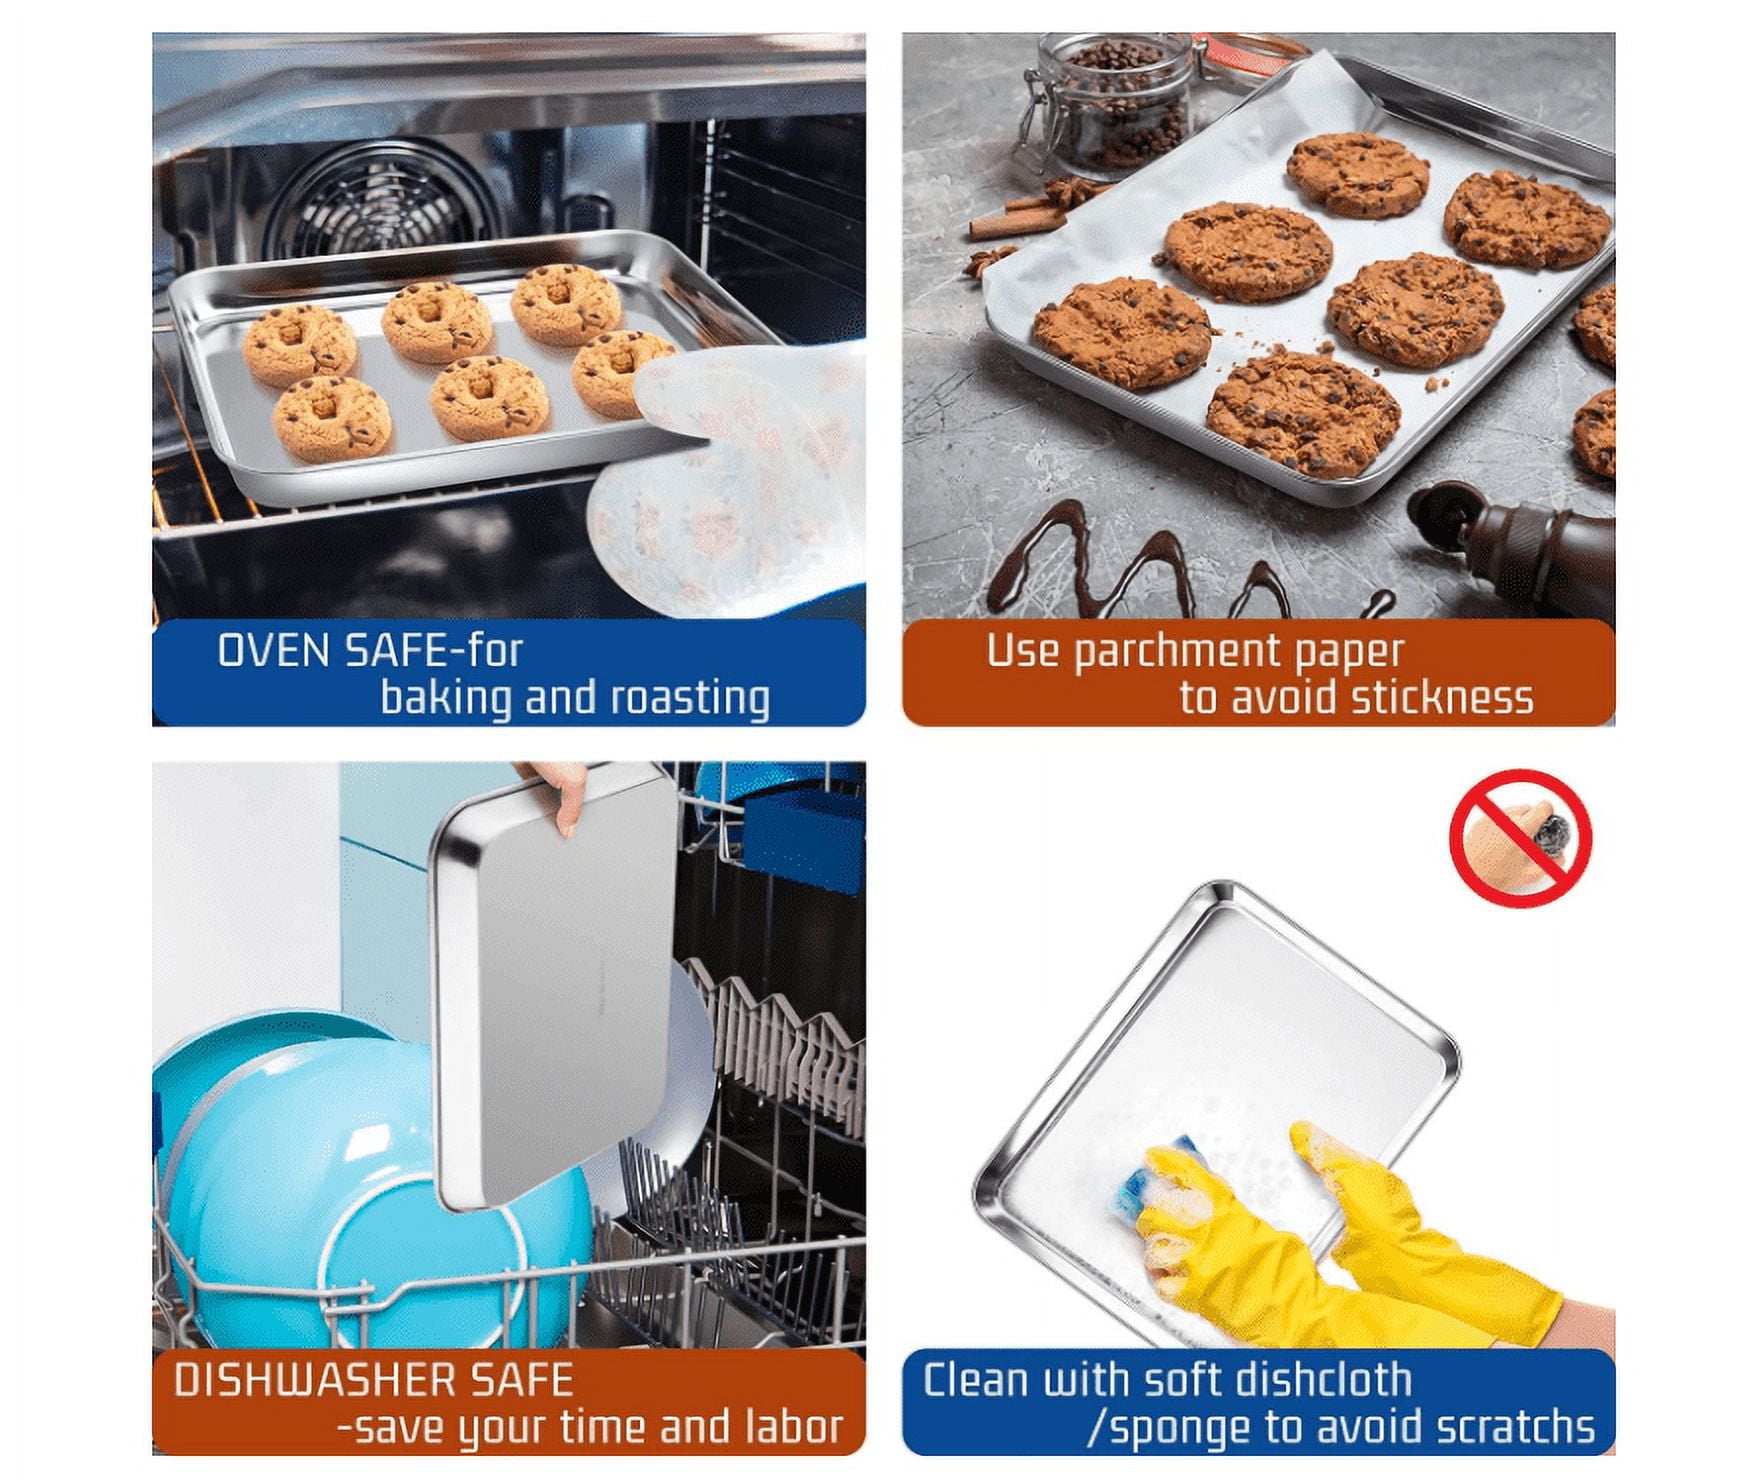 Small Baking Sheet Stainless Steel Cookie Sheet Mini Toaster Oven Tray Pan,  Rectangle Size 10.4 x 8 x 1 inch, Non Toxic & Healthy,Superior Mirror